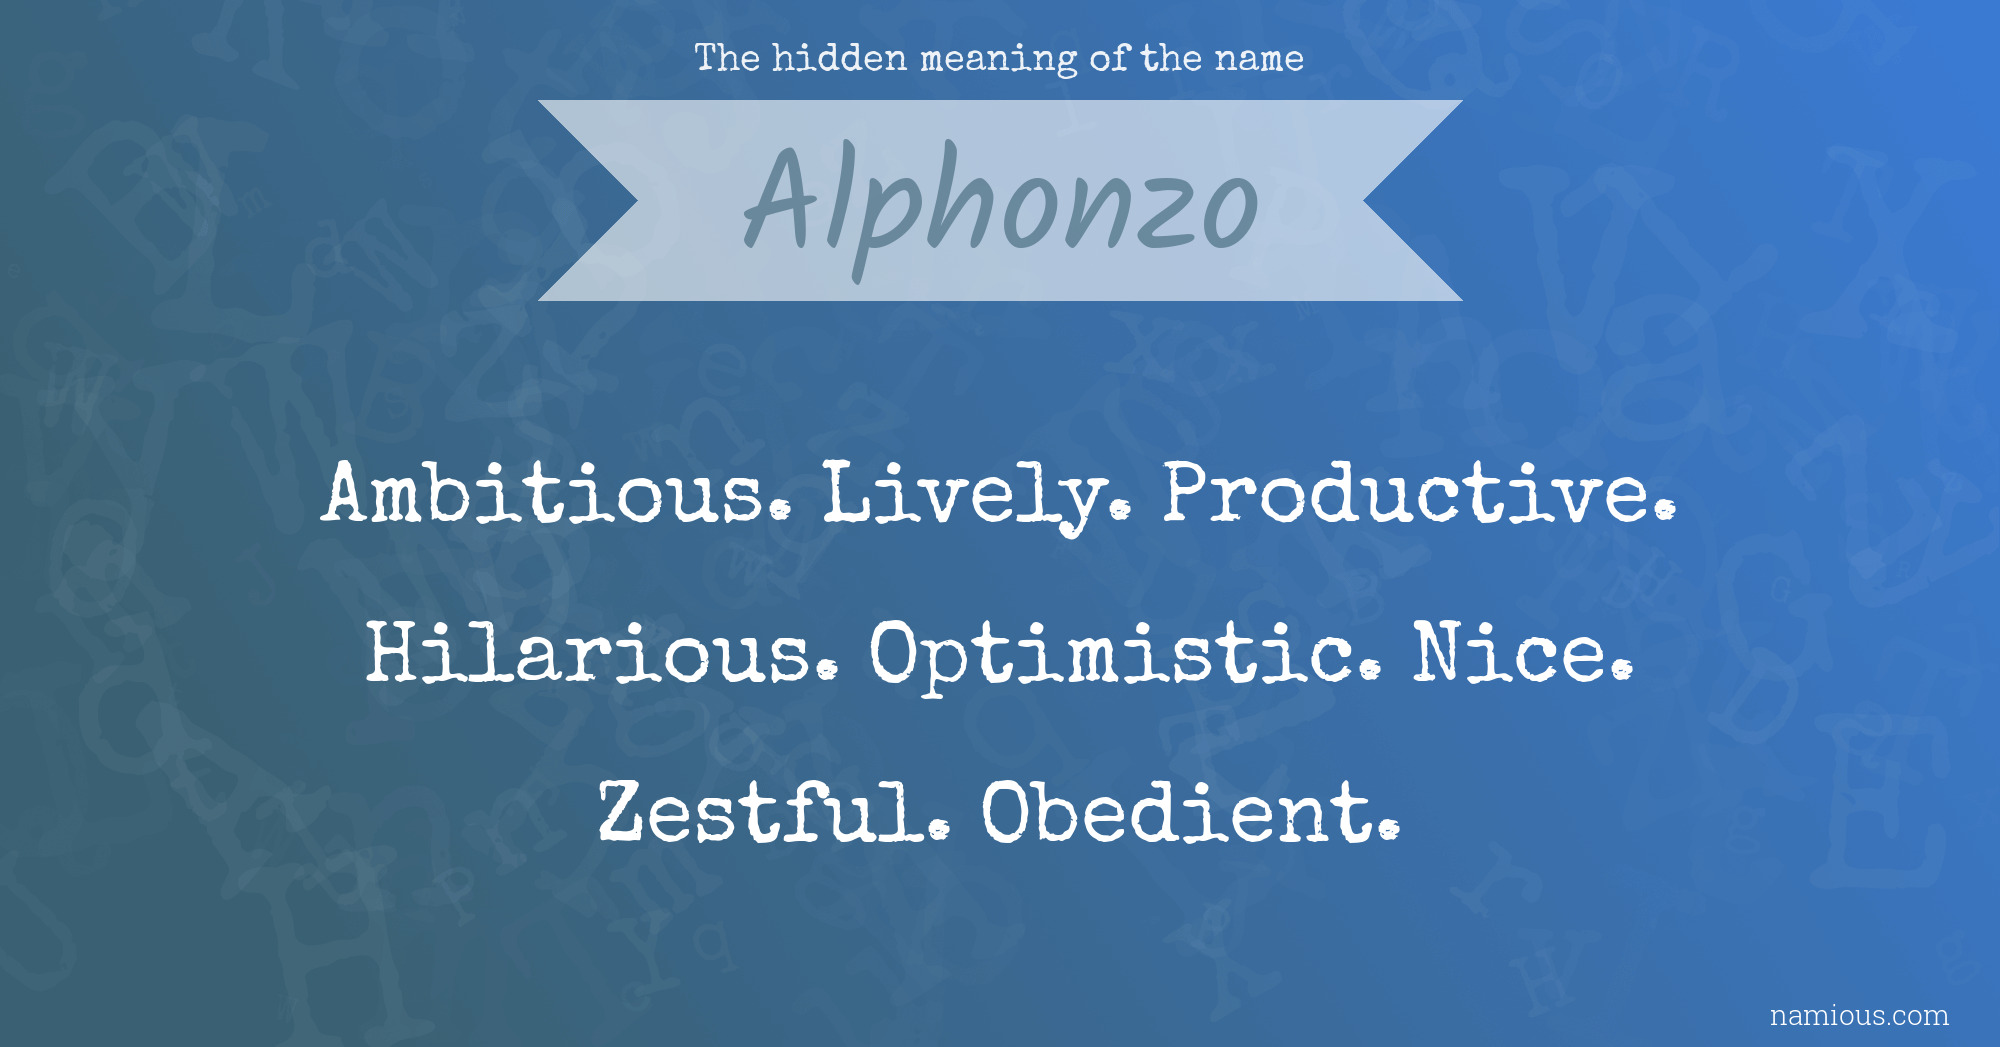 The hidden meaning of the name Alphonzo